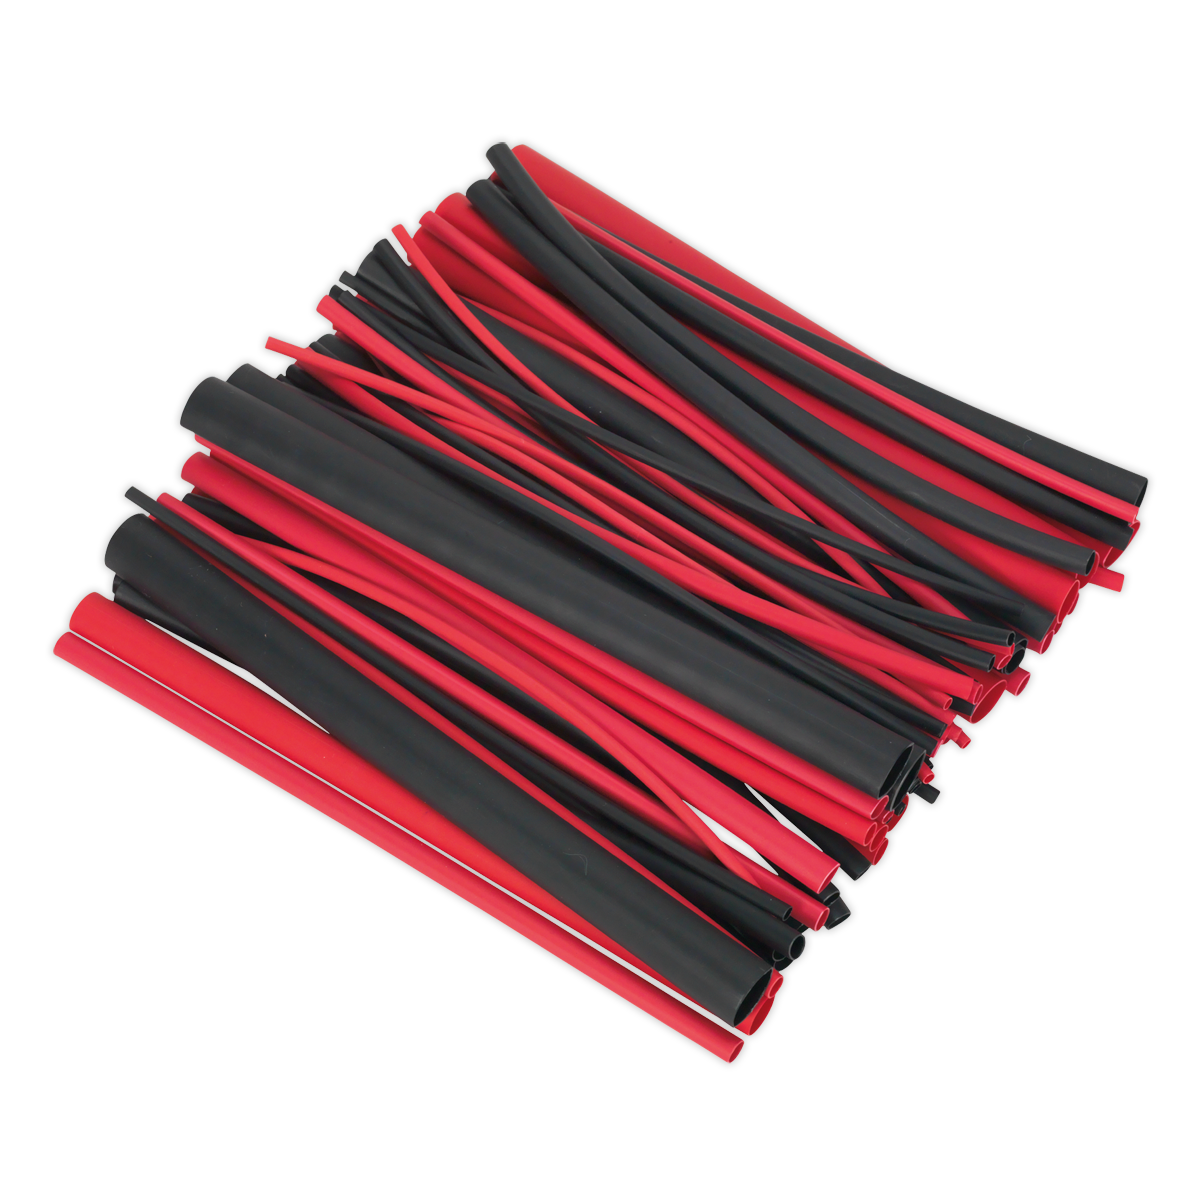 Sealey Heat Shrink Tubing Assortment 72pc Black & Red Adhesive Lined 200mm